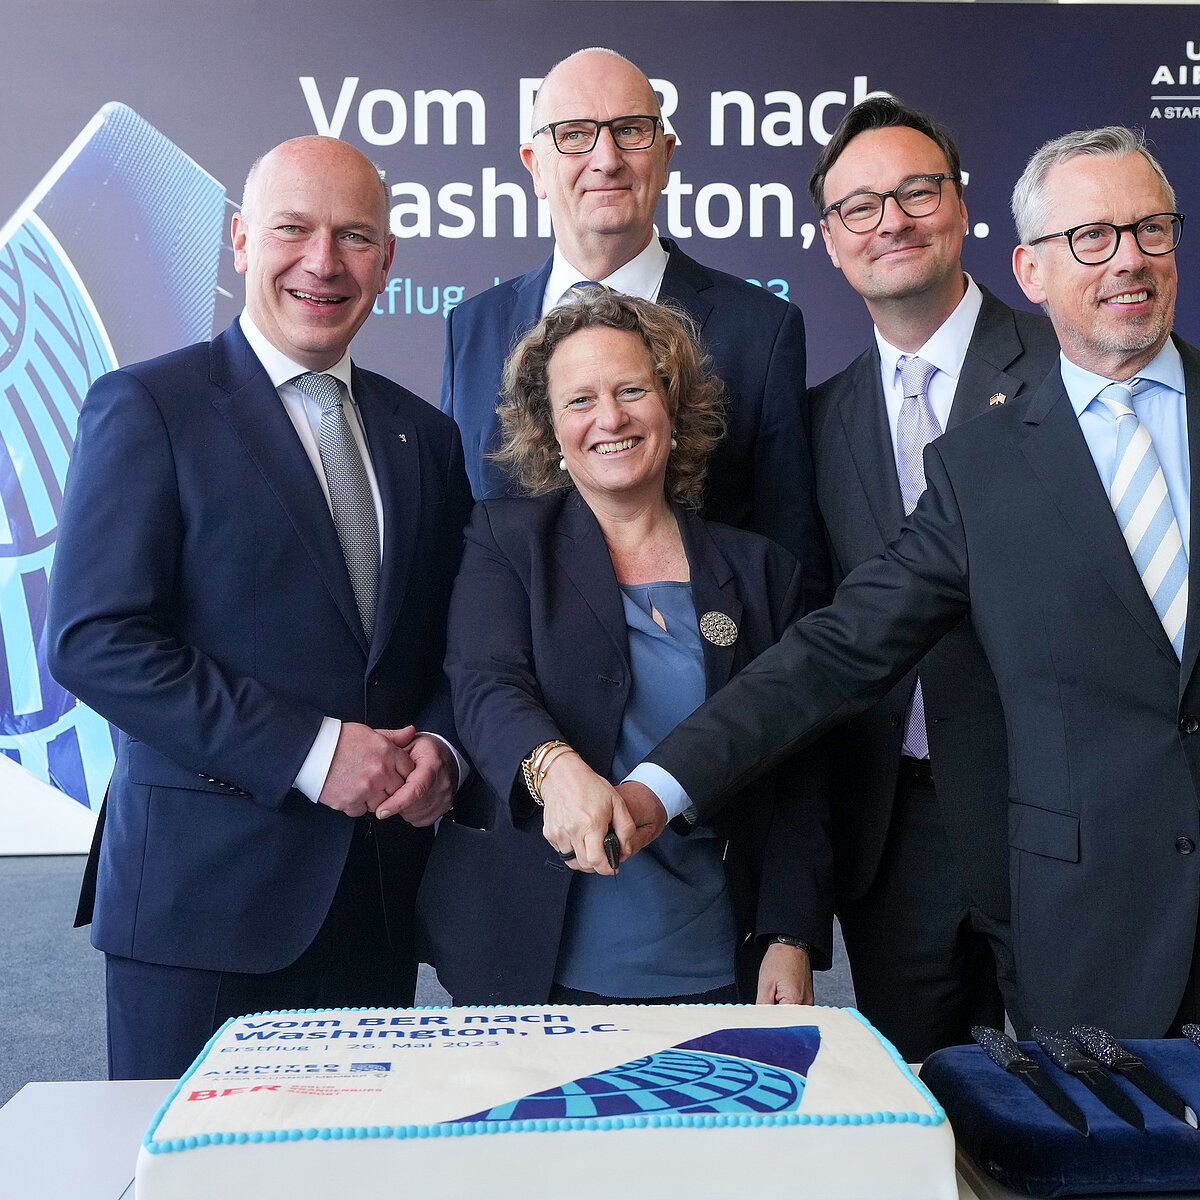 Ceremonial cake cutting for the inaugural United Airlines flight to Washington D.C. with the following people: Kai Wegner, Governing Mayor of Berlin; Aletta von Massenbach, Chairwoman of the Management Board of Flughafen Berlin Brandenburg GmbH; Dr. Dietmar Woidke, Minister President of the State of Brandenburg; Parliamentary State Secretary Oliver Luksic, Member of the Bundestag for the Federal Minister of Digital Affairs and Transport; Thorsten Lettnin, Director Sales Continental Europe, Middle East, Africa, India and Israel, United Airlines.